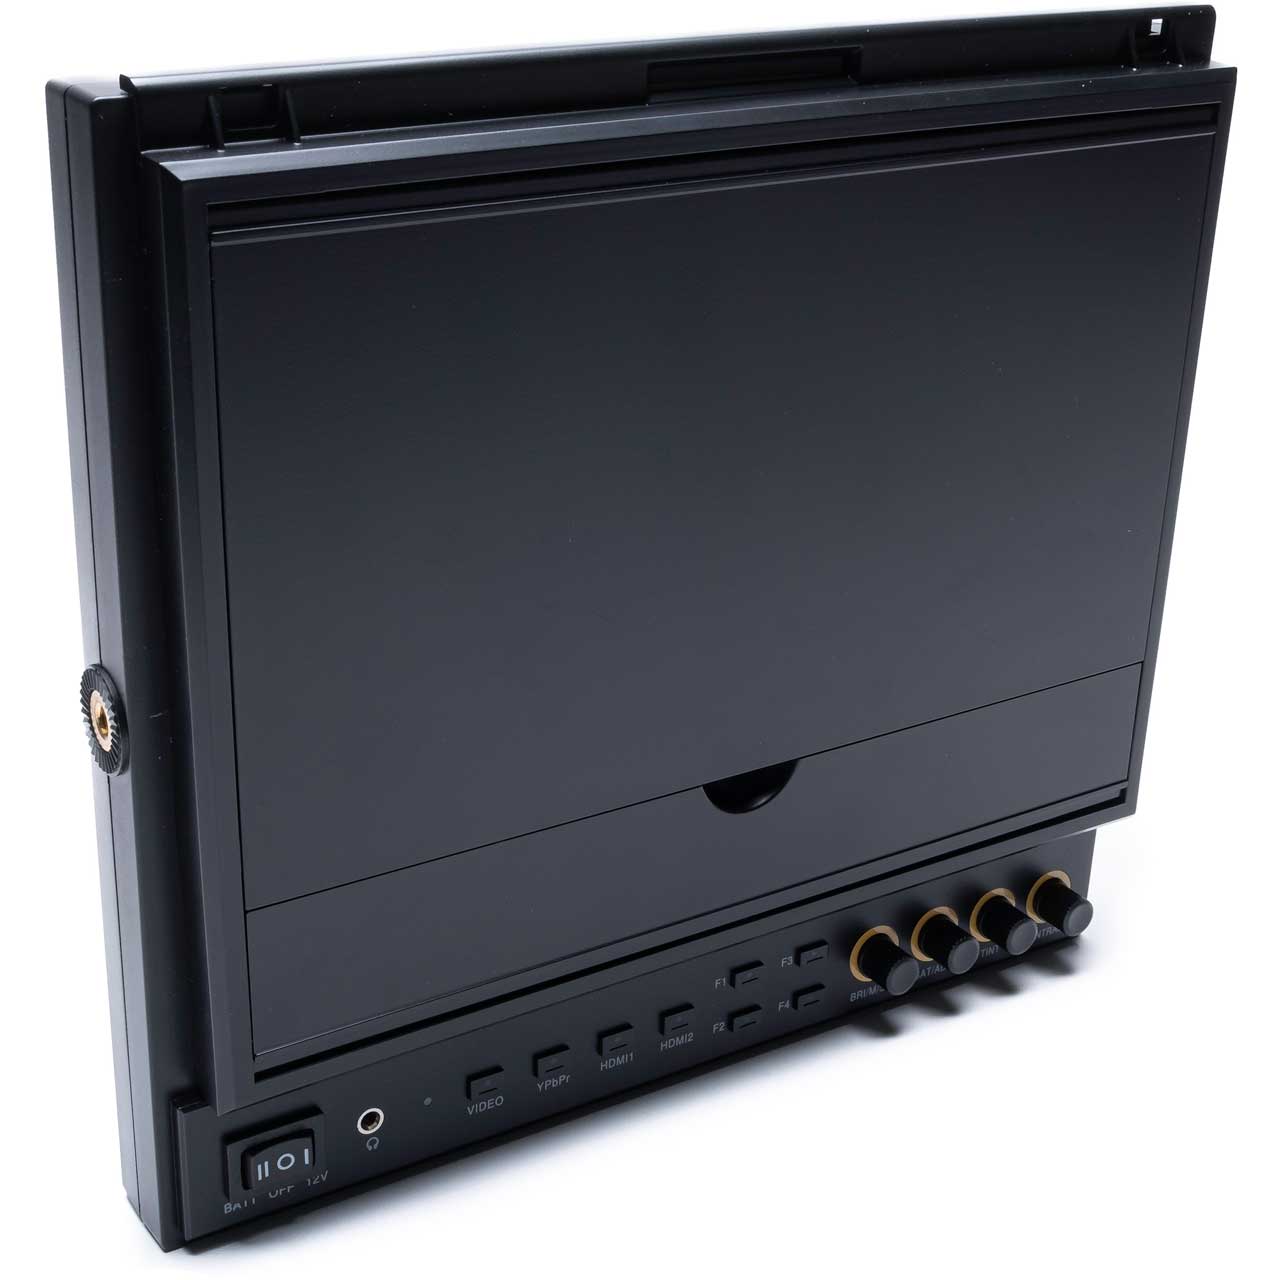 Delvcam 9.7in Dual Input HDMI Monitor with Advanced Function - with Case - BStock (Used/Missing Box) DELV-HDSD-10-BS3